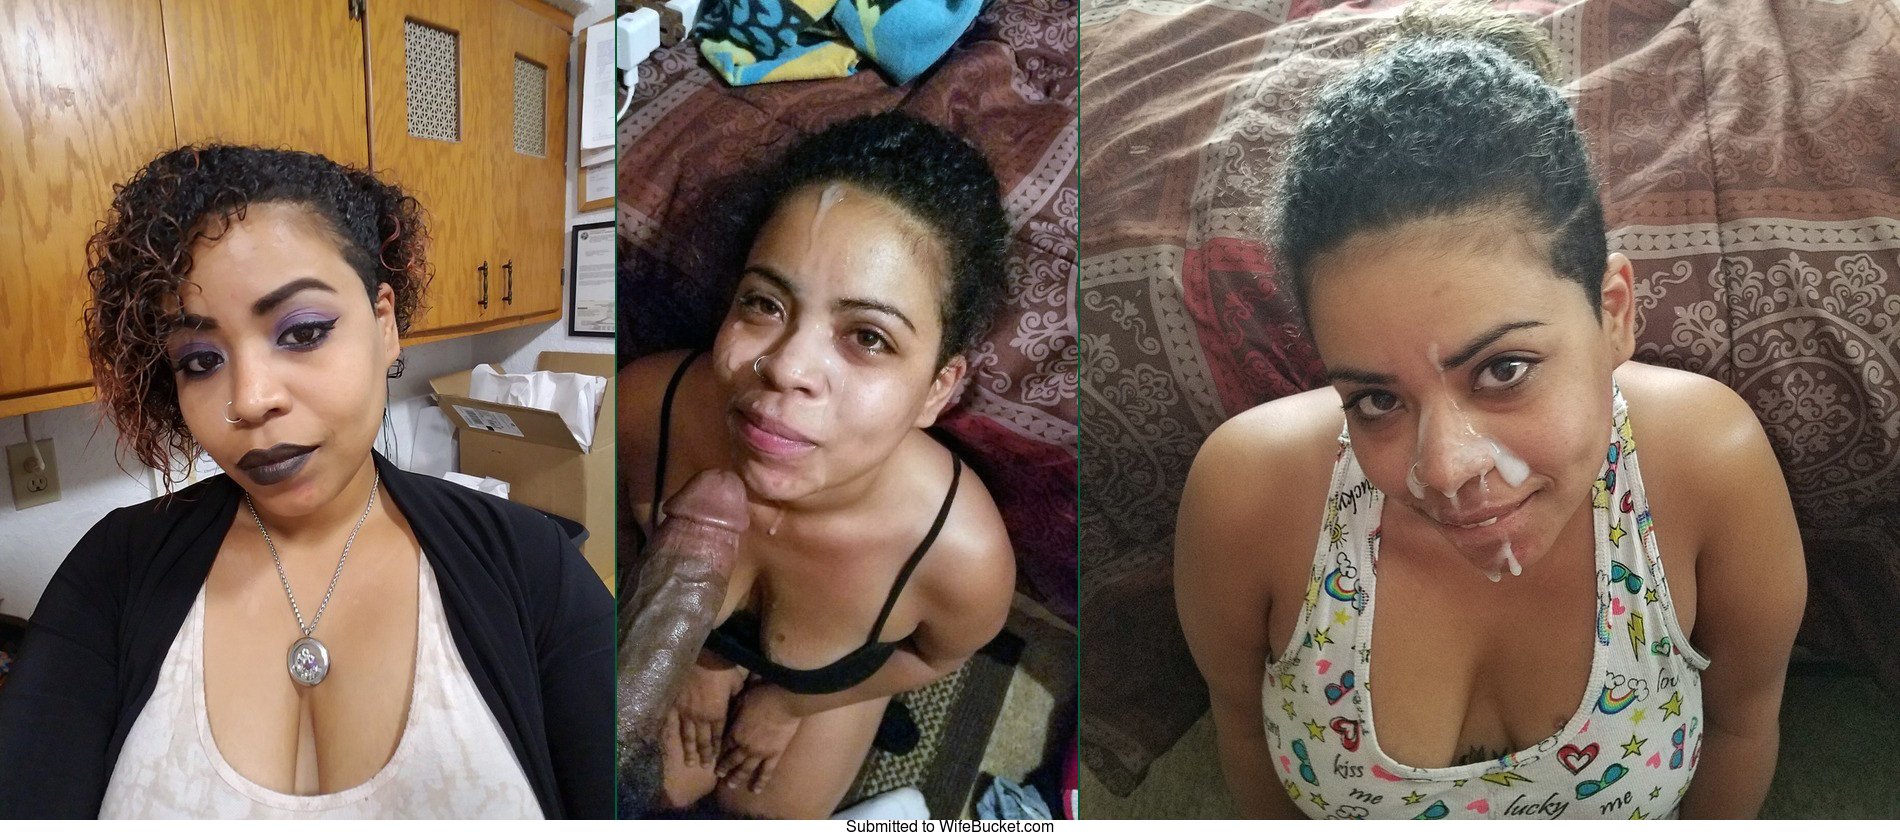 1900px x 837px - 6 amateur pics before and after the facial cumshot! â€“ WifeBucket | Offical  MILF Blog